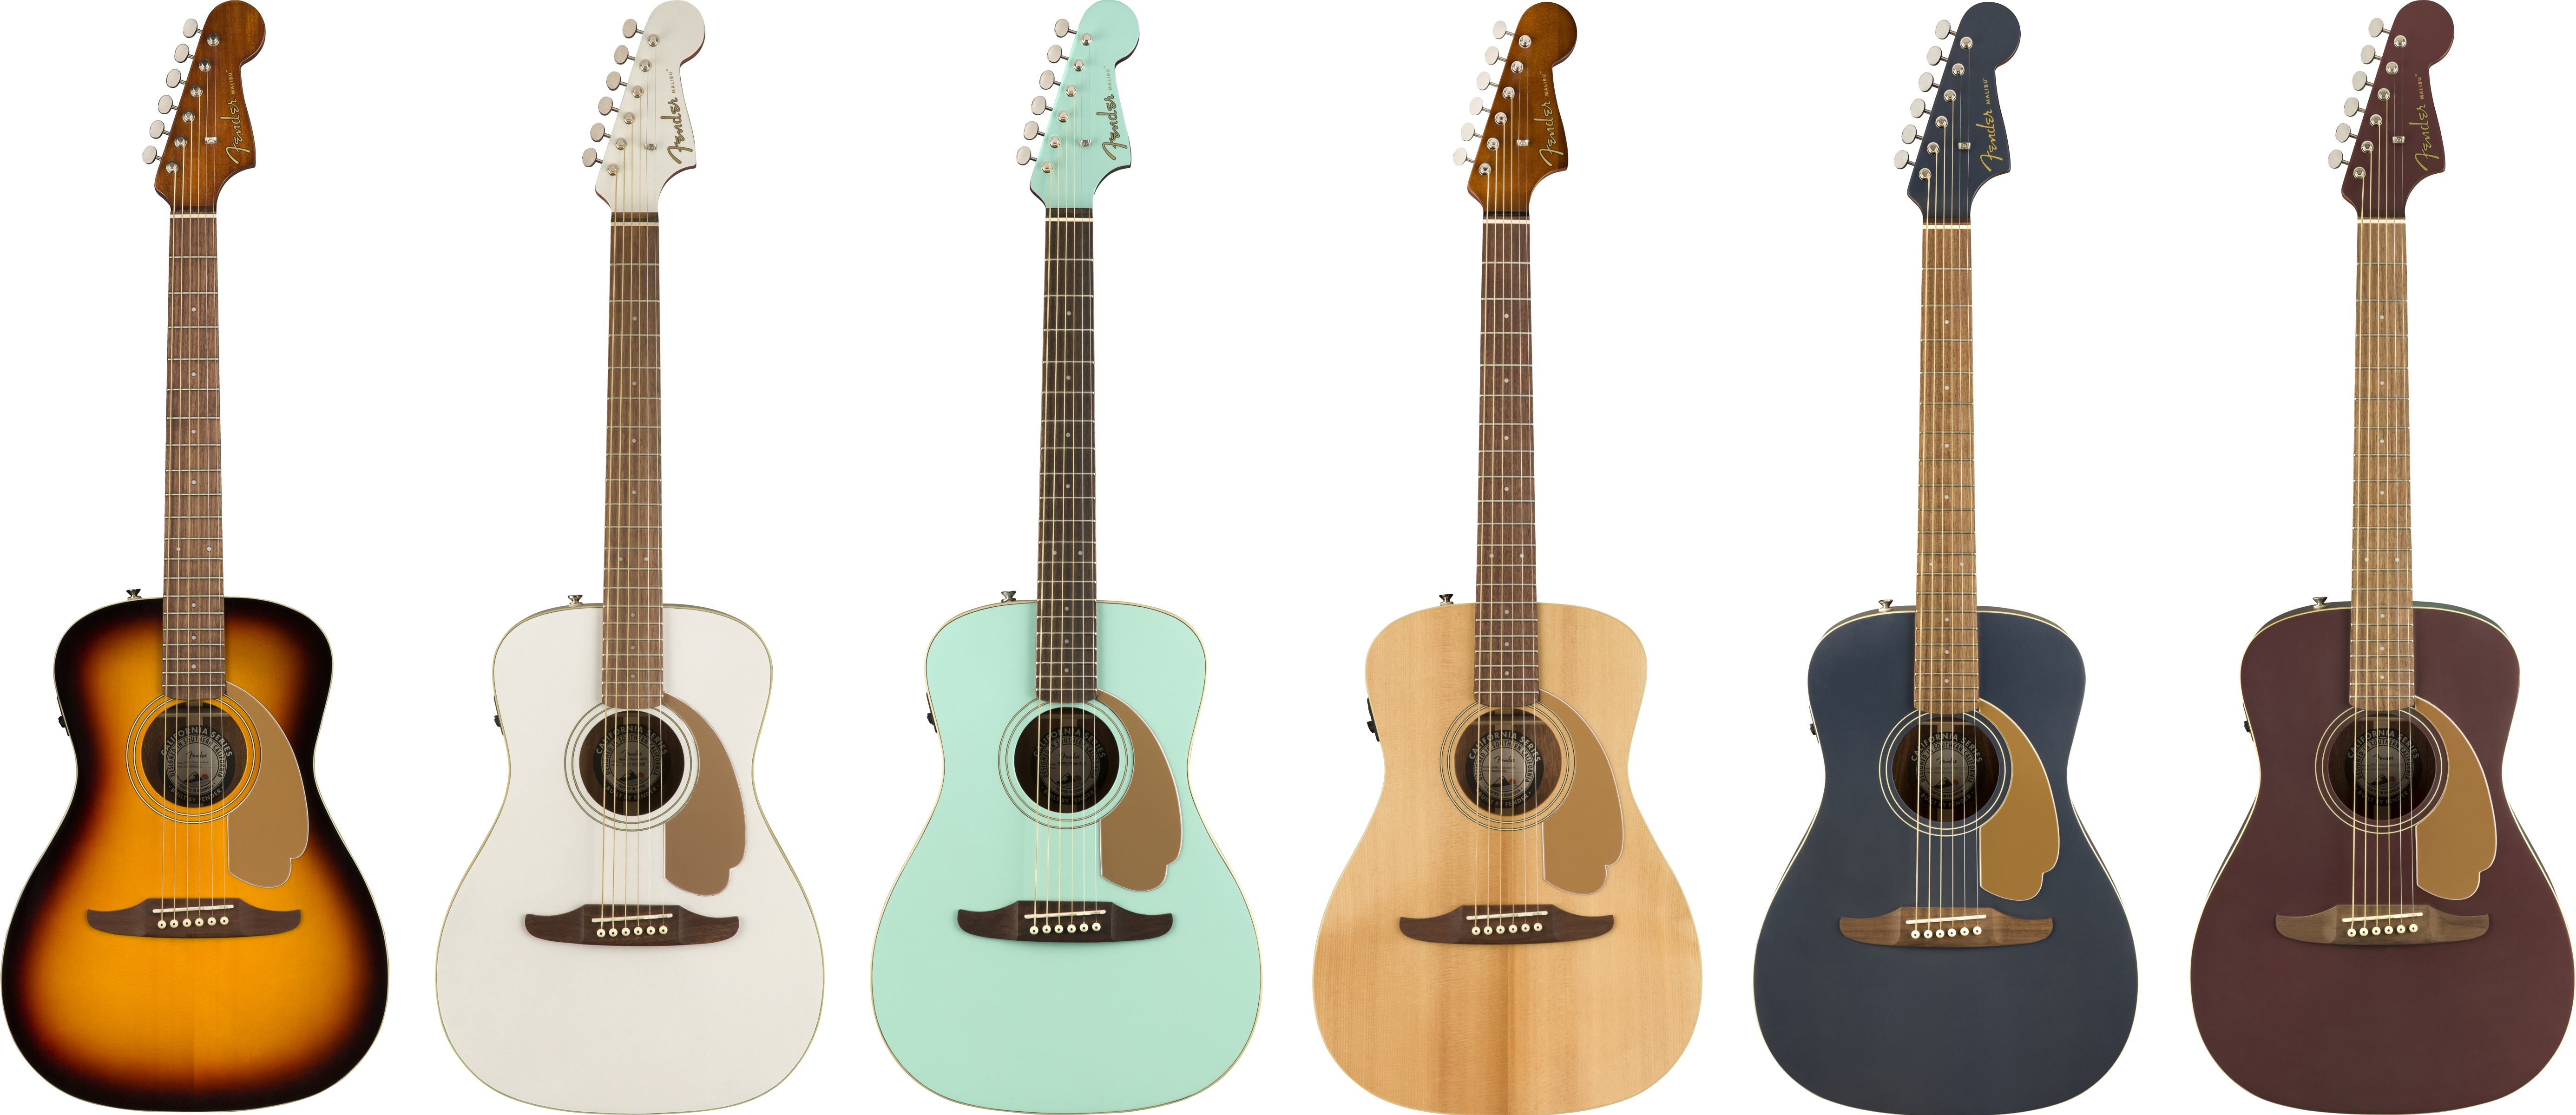 Fender Malibu Player colors available